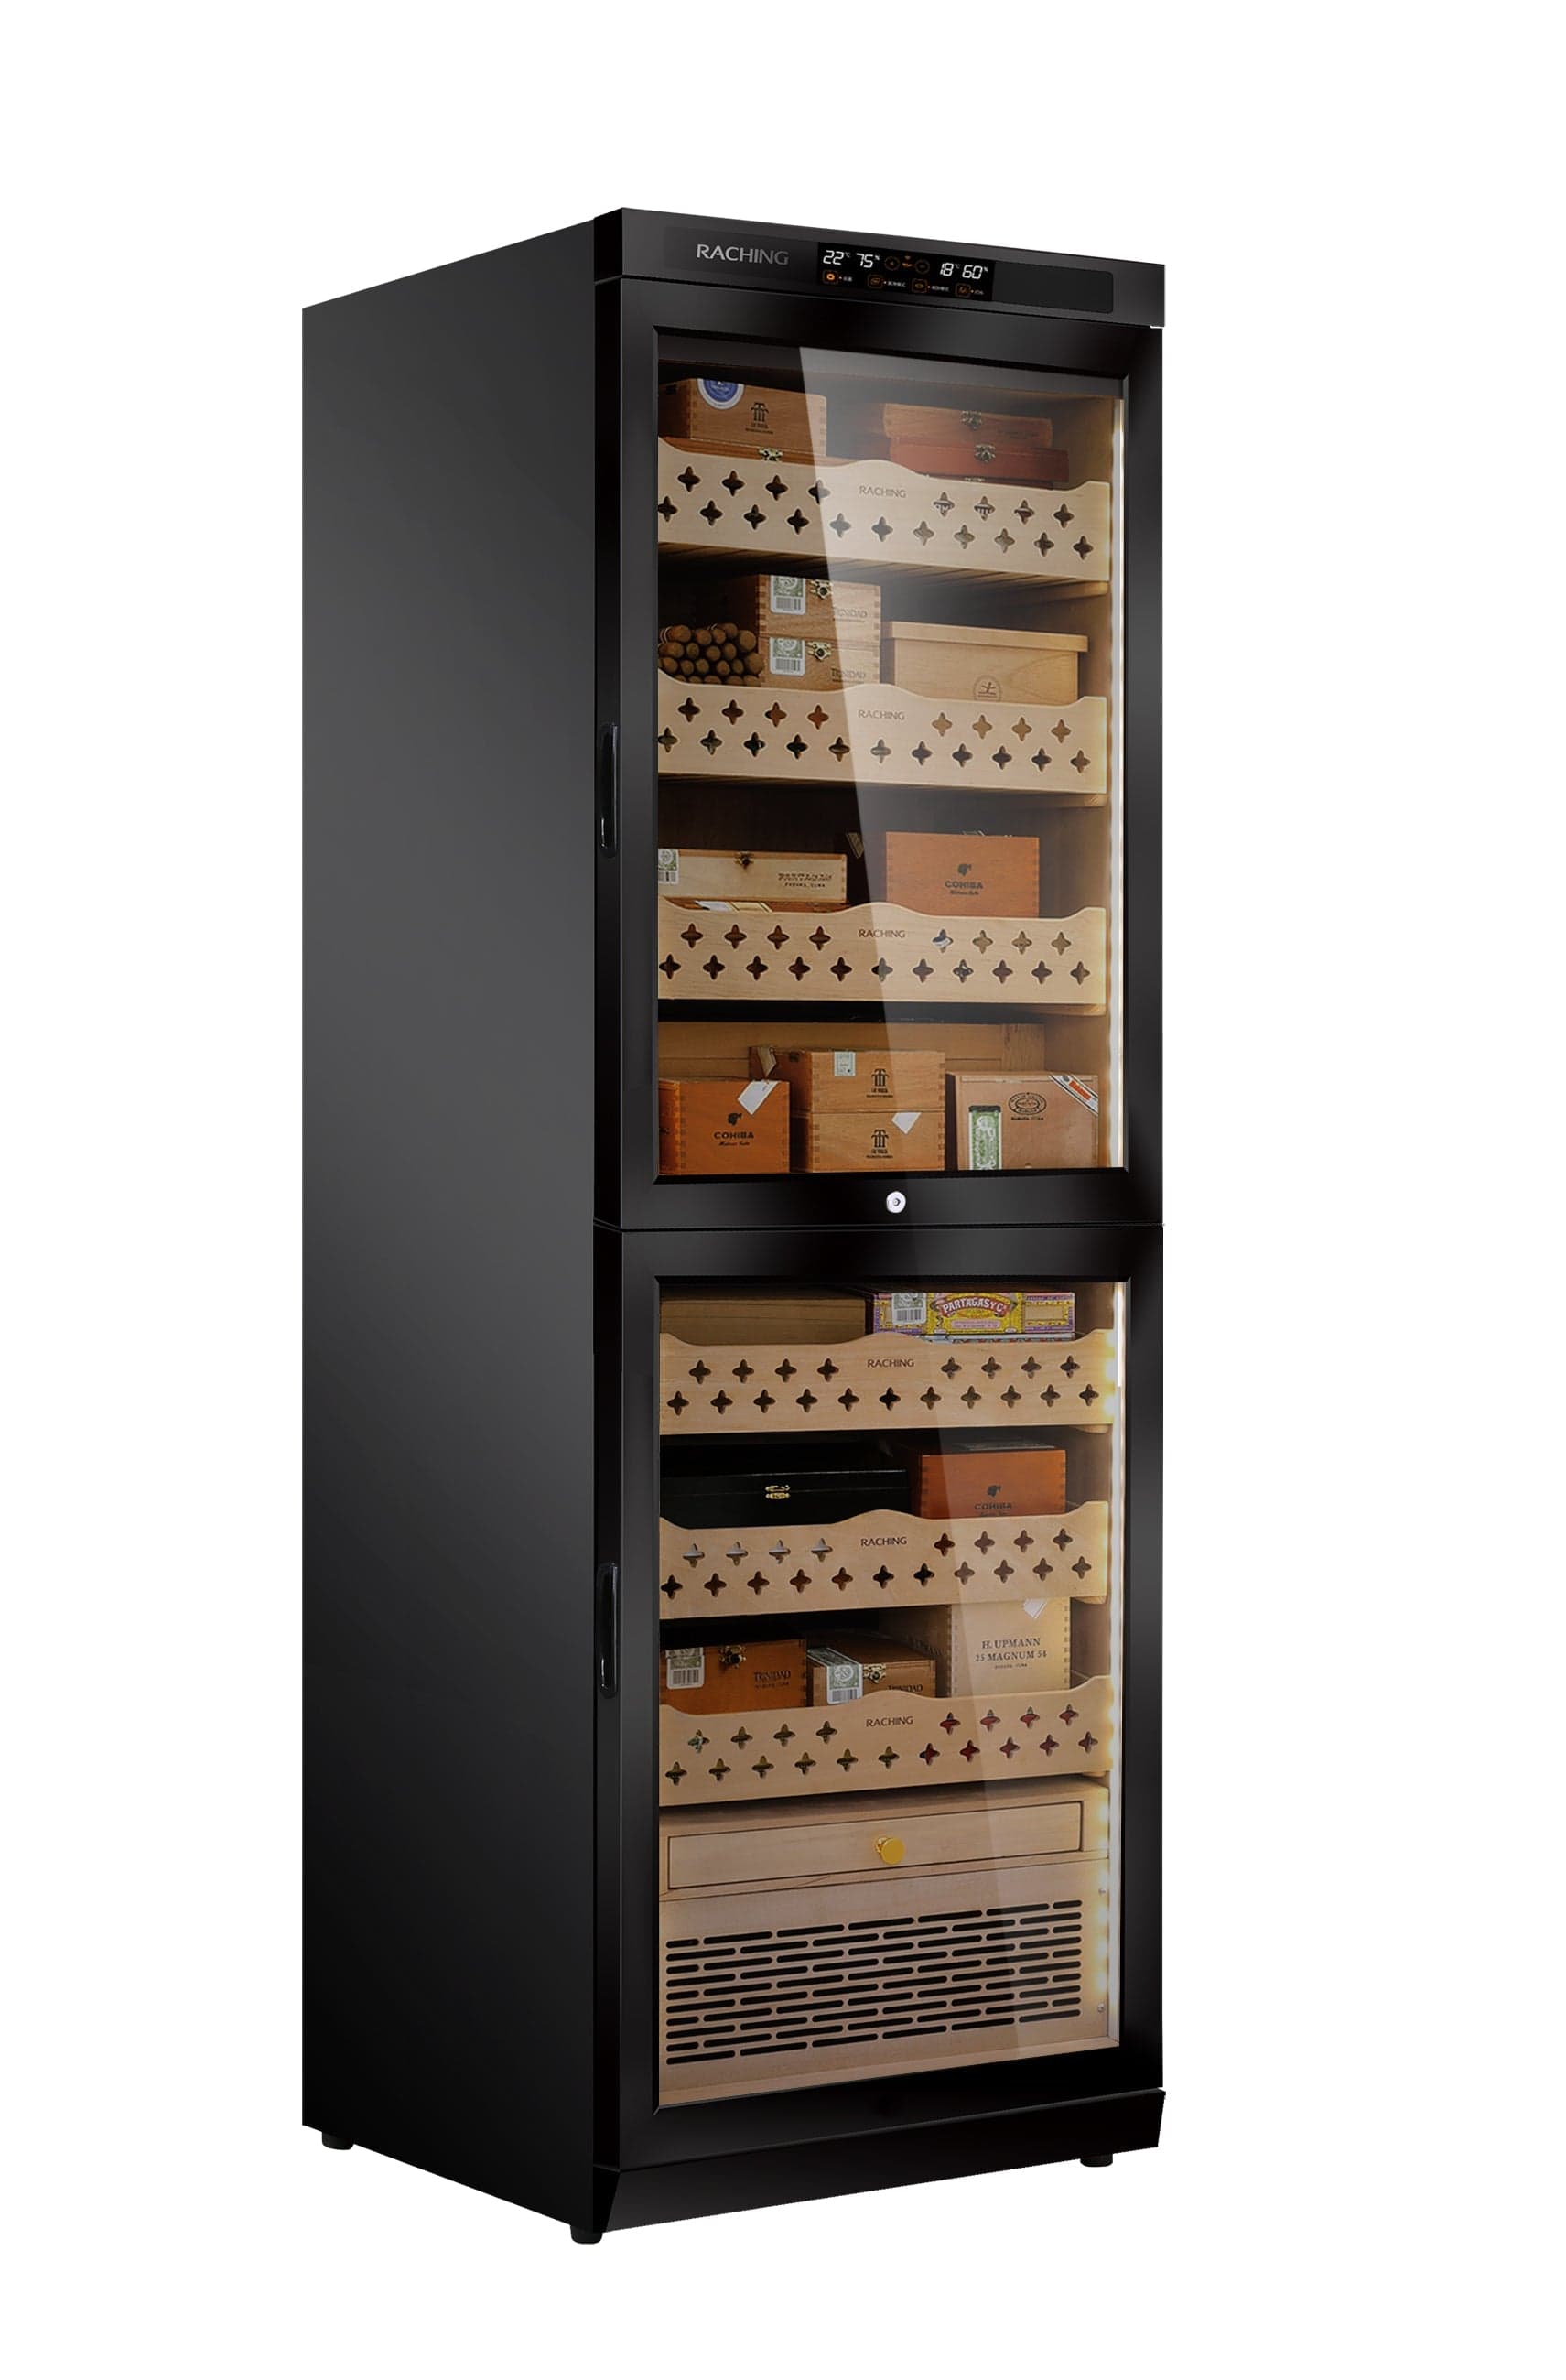 Raching MON3800B dual space cigar humidor Wine Coolers Empire